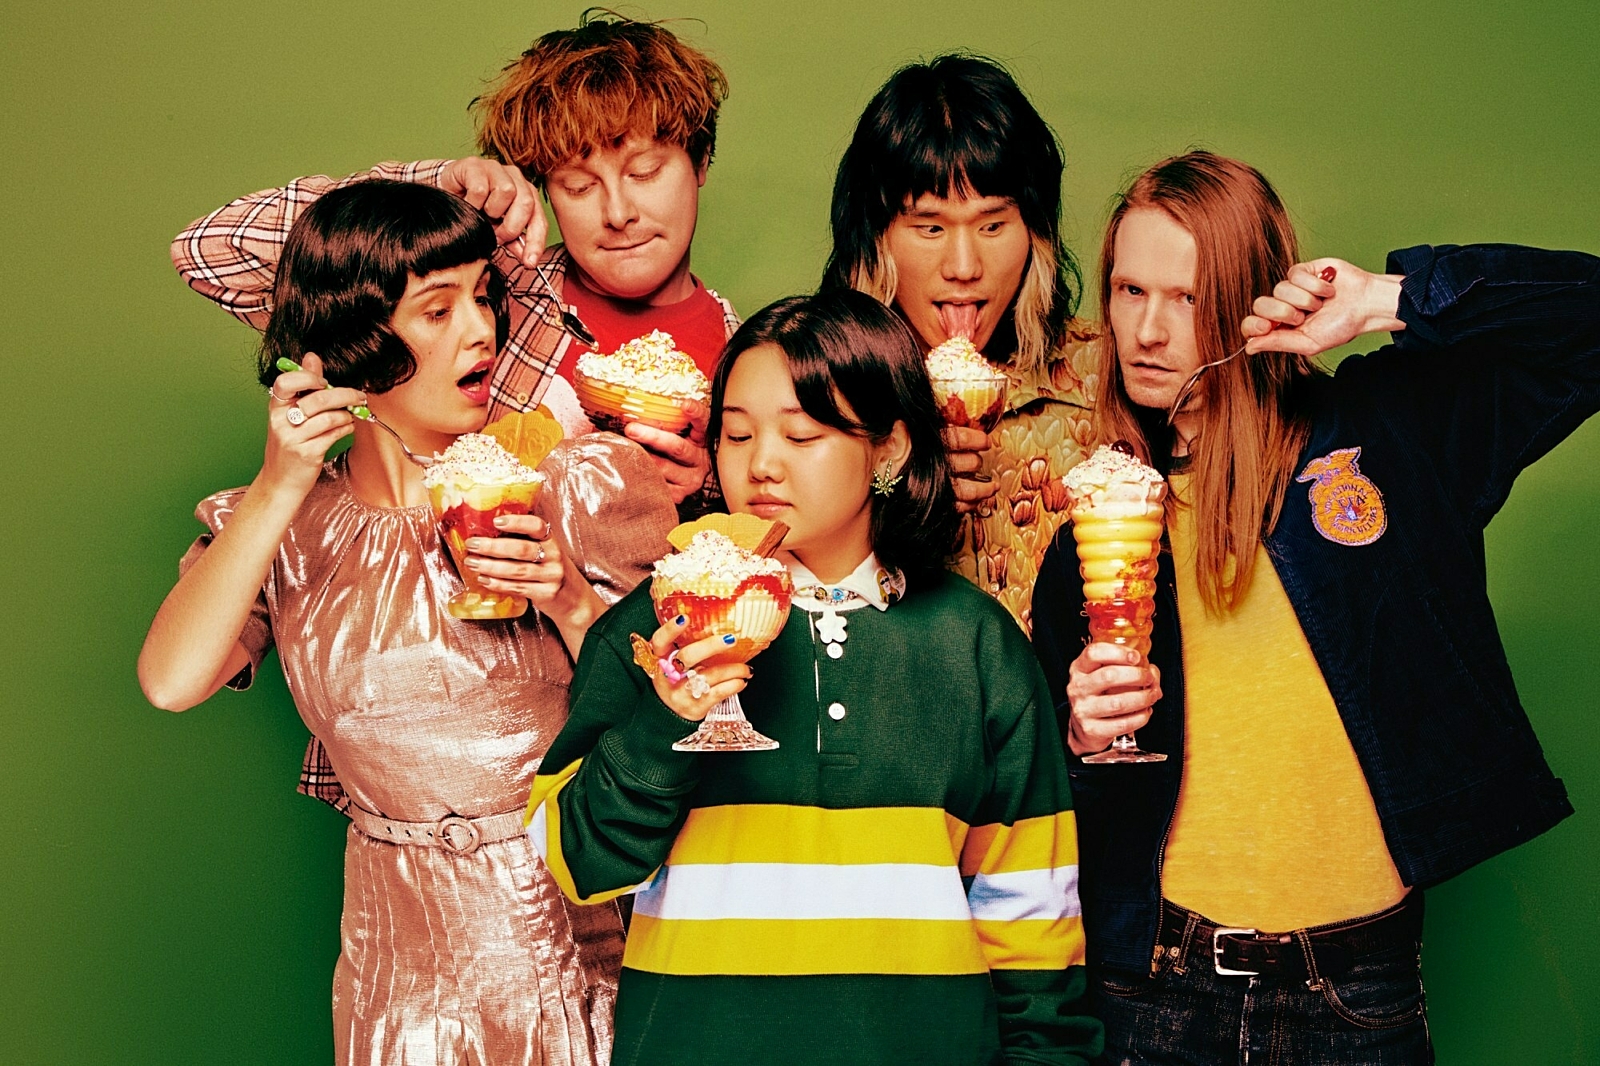 Superorganism offer up new track 'On & On'